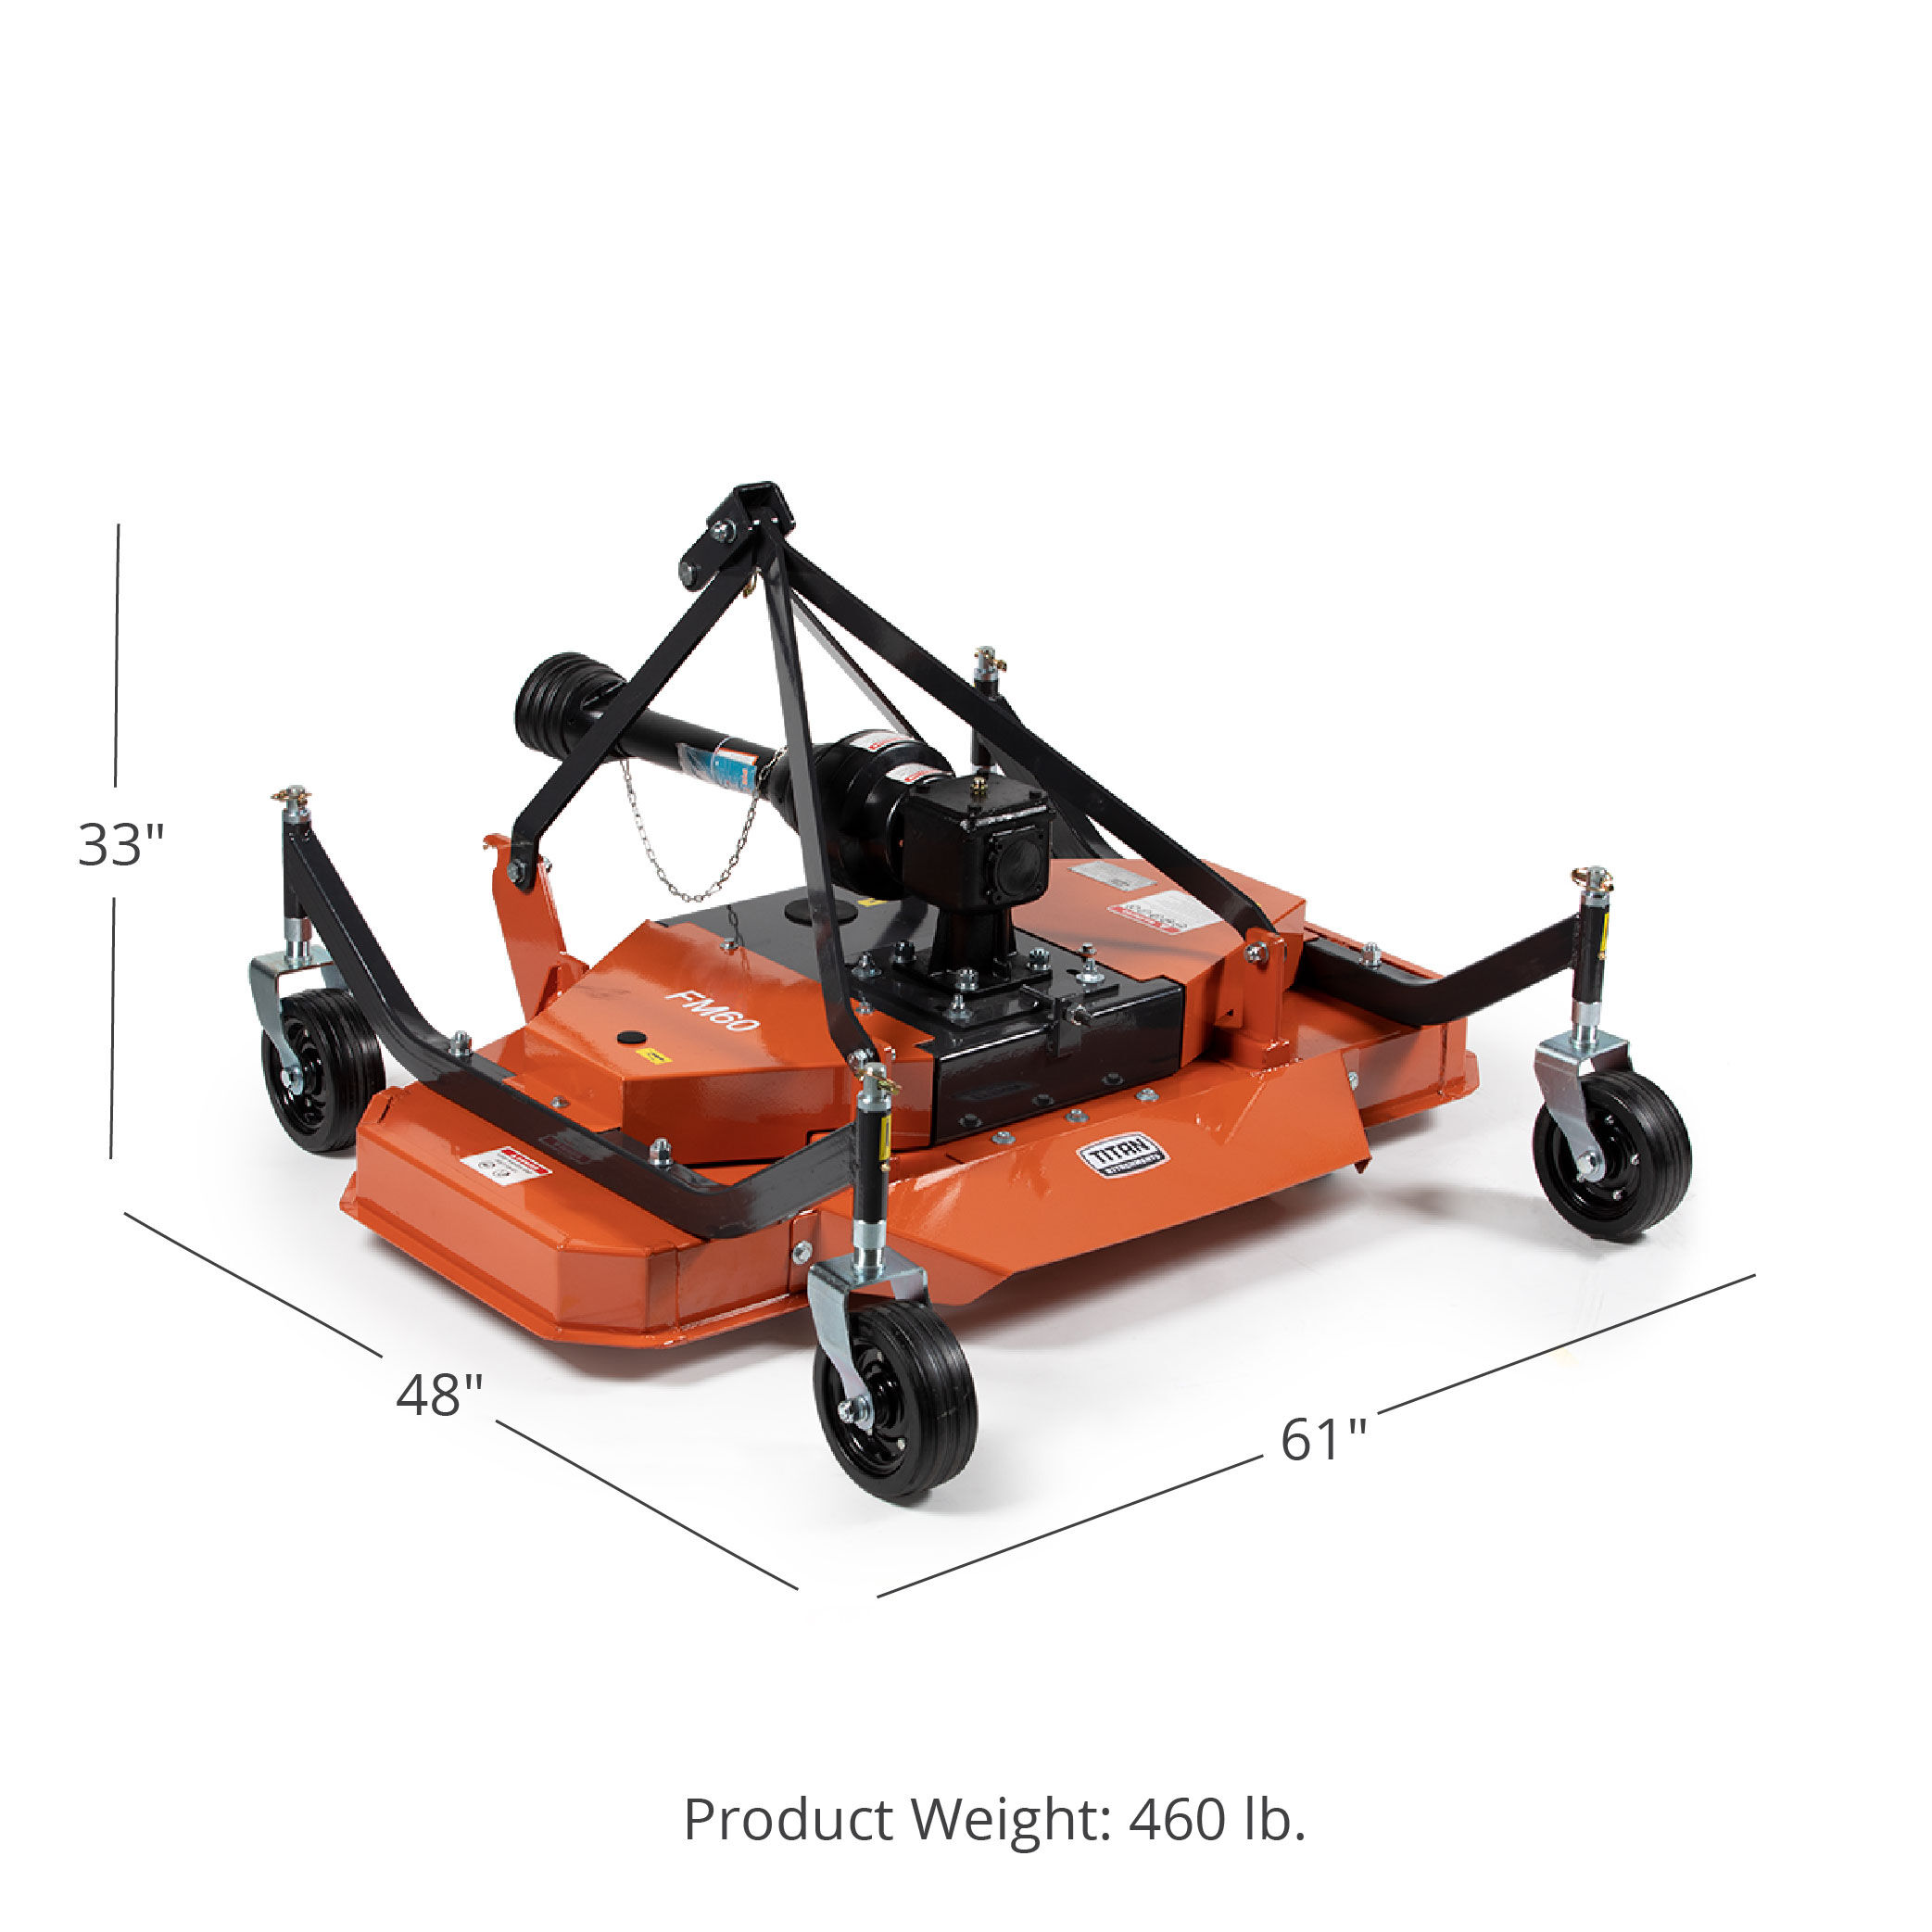 Titan Attachments 3 Point PTO Finish Mower, 60" Cutting Width, Category 1 Hitch, Rear Discharge, Requires 25-40 HP Tractor, Low-Noise Cast Iron Gearbox, Landscaping, Mowing - image 2 of 6